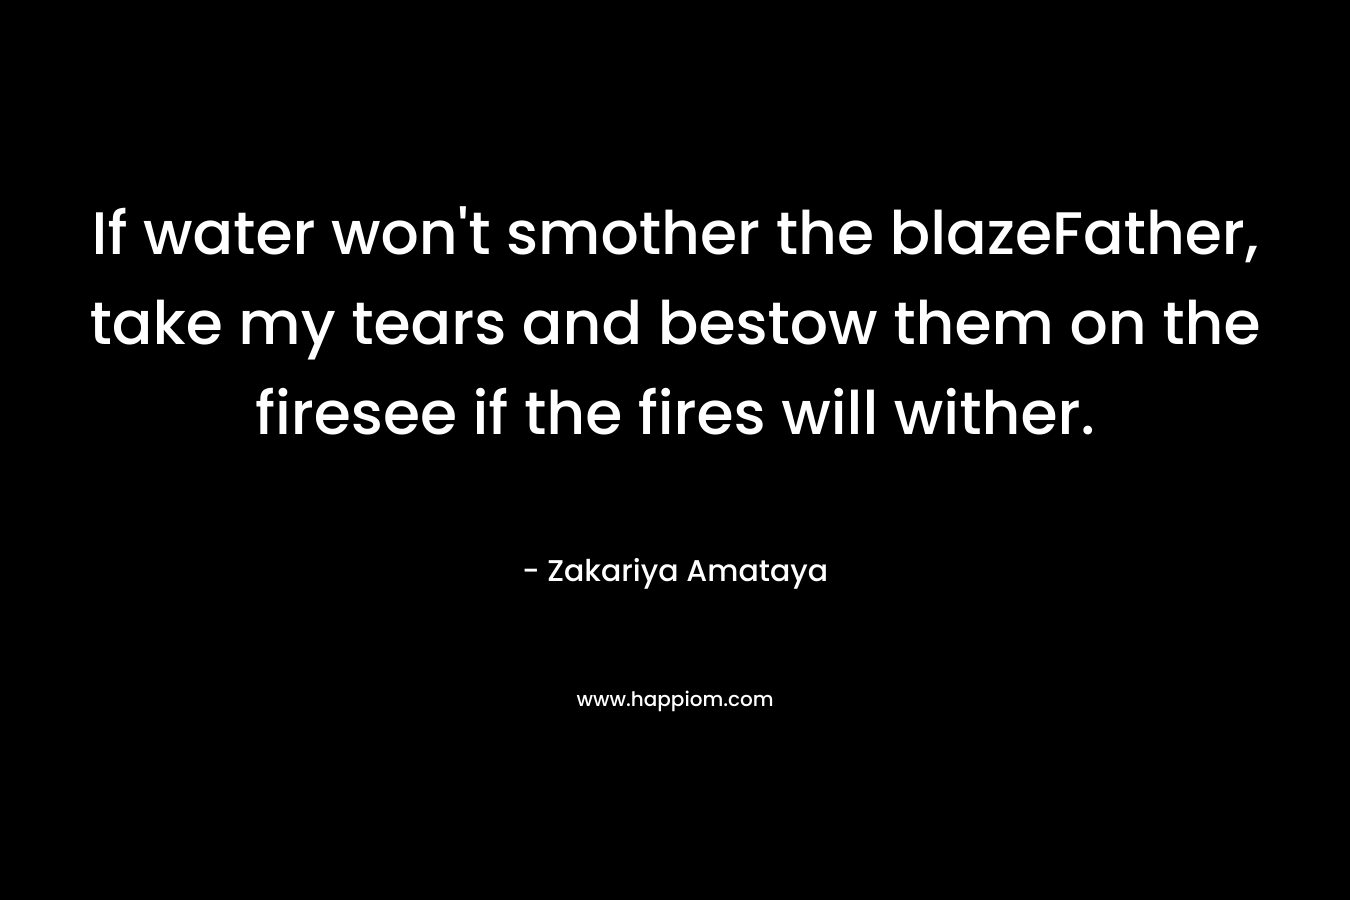 If water won't smother the blazeFather, take my tears and bestow them on the firesee if the fires will wither.